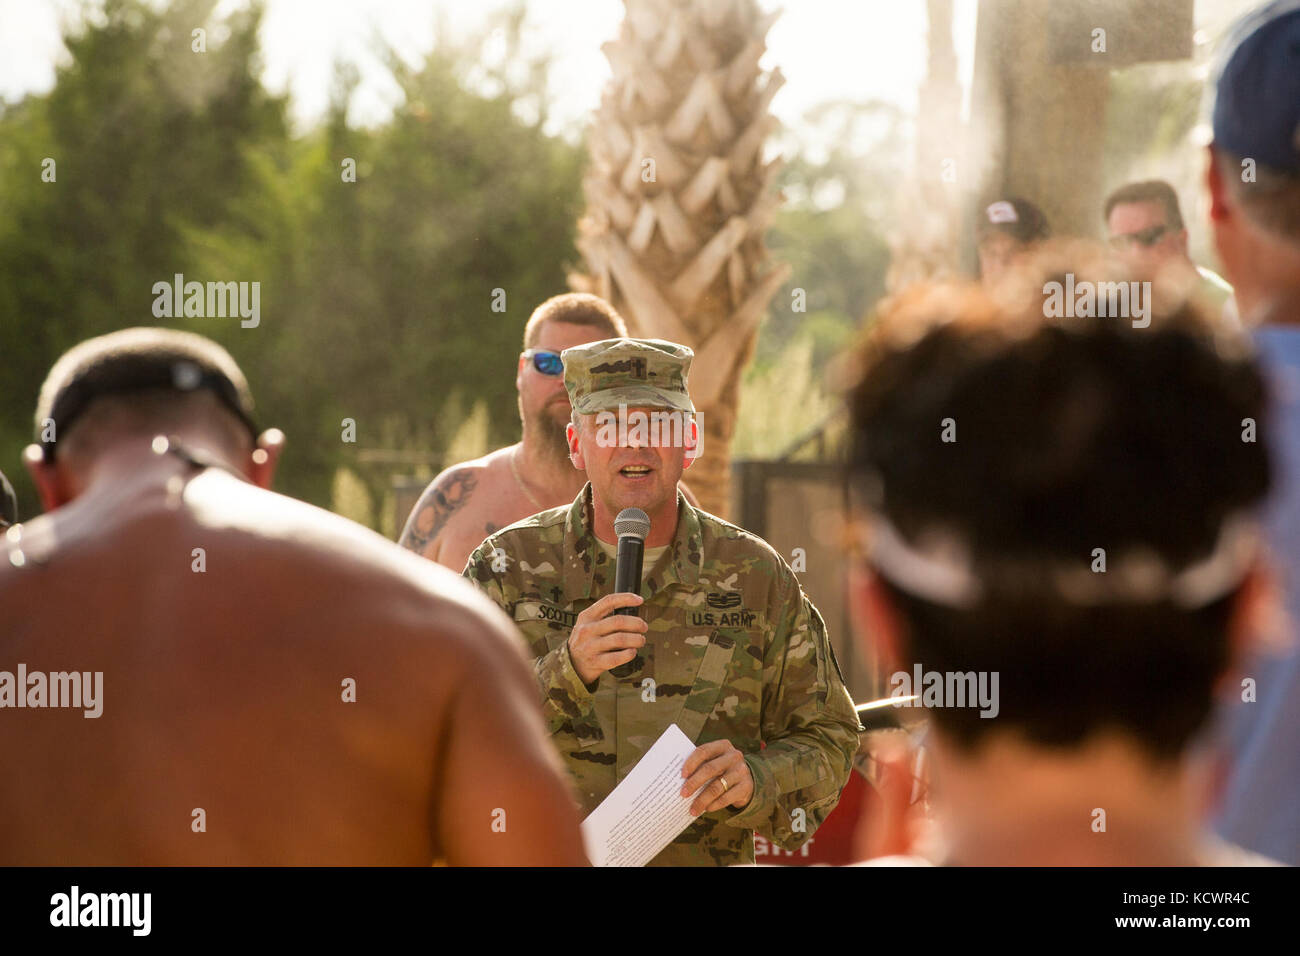 U.S. Army Chaplain Lt. Col. Clyde Scott gives a prayer at the Frayed Knot on Lake Murray, S.C., during a memorial for Army Sgts First Class Charles Judge, Jr., and Jonathon Prins, July 29, 2016.  The two soldiers were killed while attempting to protect a woman who was allegedly being attacked by a gunman. The boat procession was a way to celebrate their lives.  (U.S. Air National Guard photo by Tech. Sgt. Jorge Intriago) Stock Photo